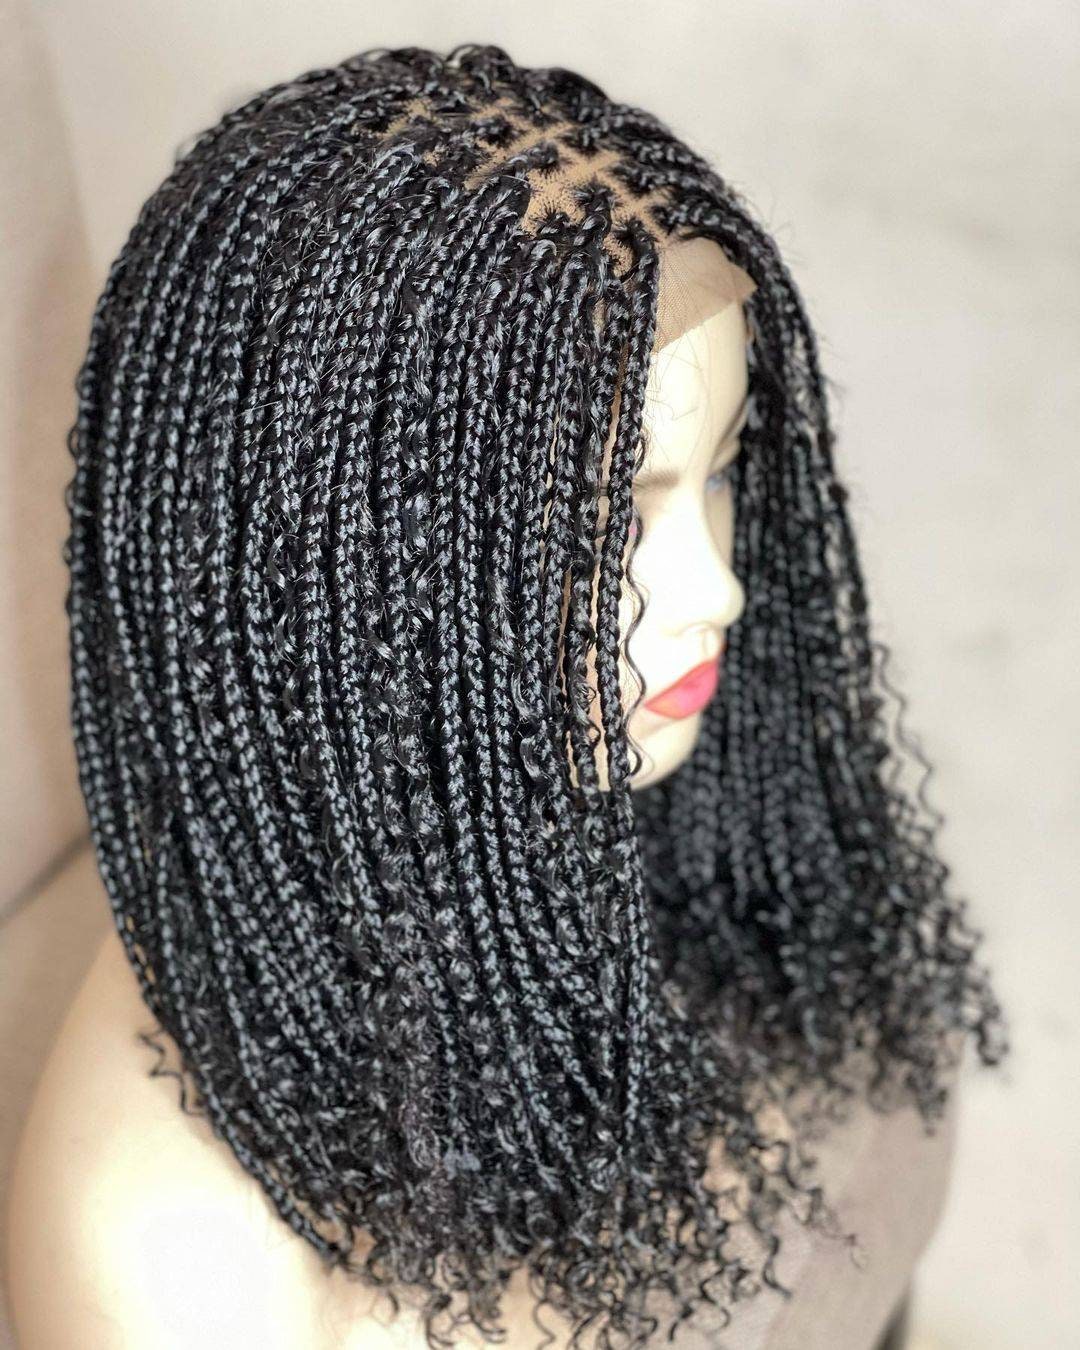 Boho Knotless Braided Wig with Lace Front & Full Lace Braided Box Braid Wig for Black Women - Ready to Ship Handmade Glueless Braids Wig